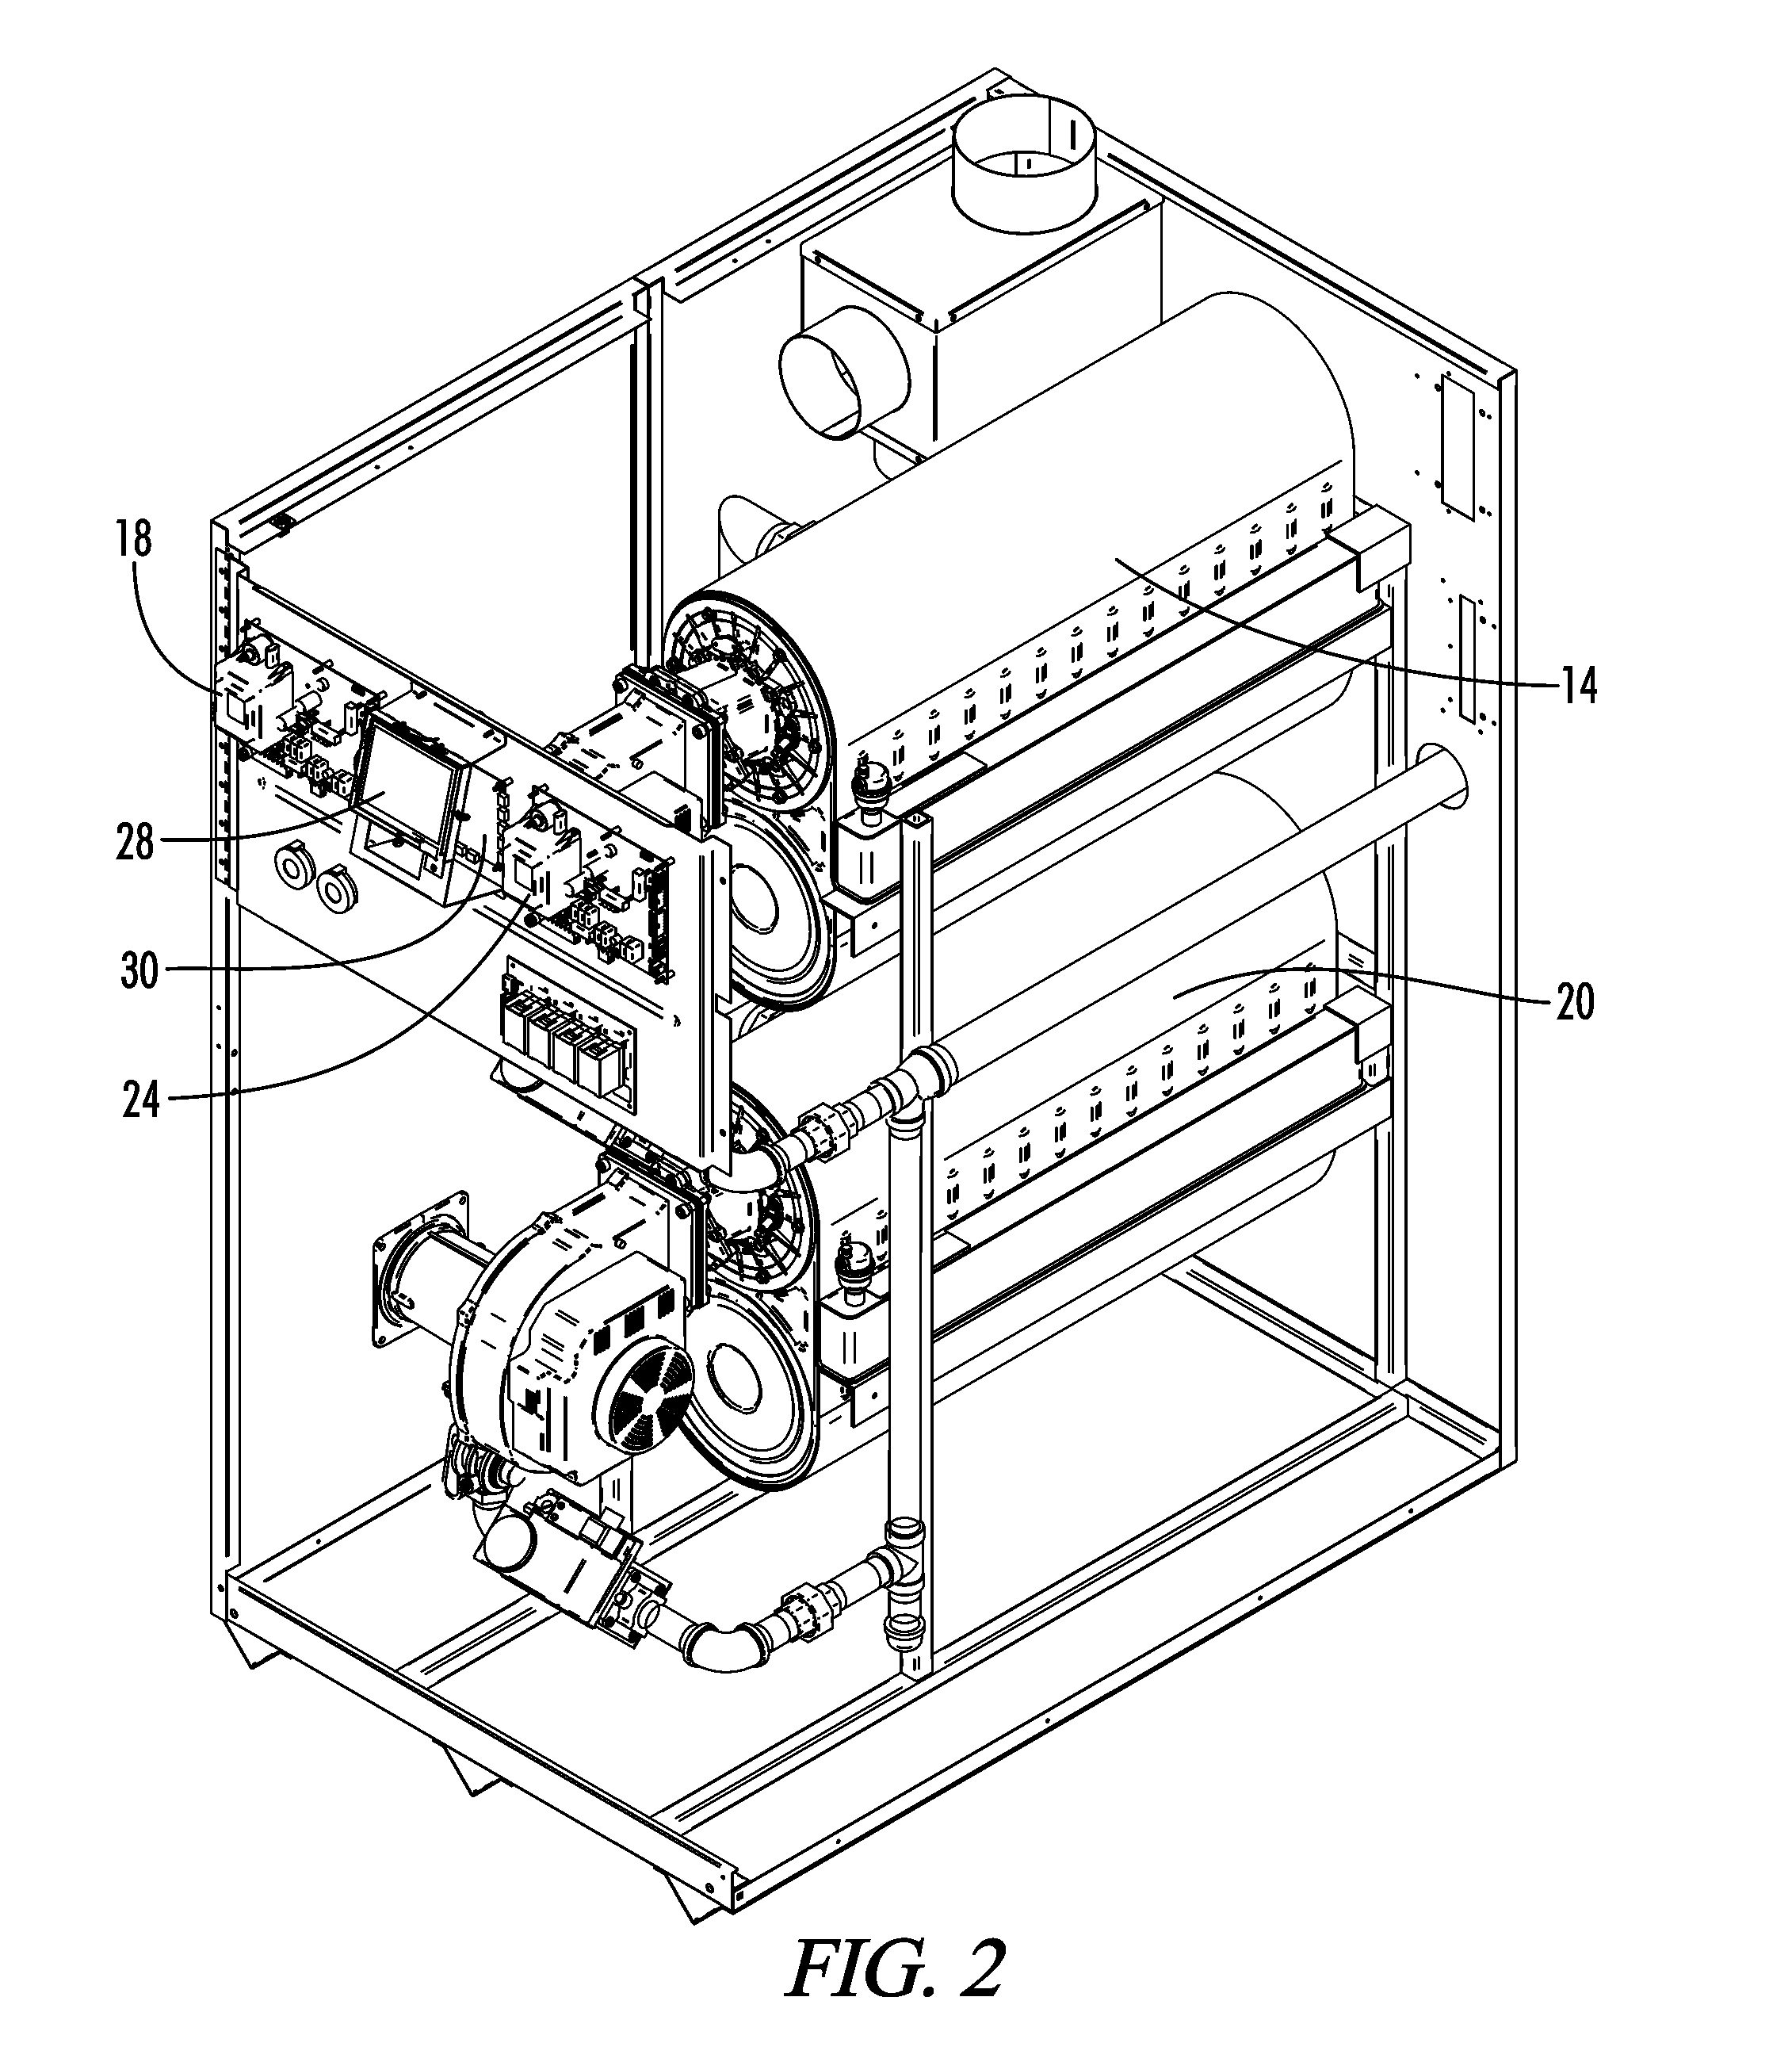 Control System For A Boiler Assembly